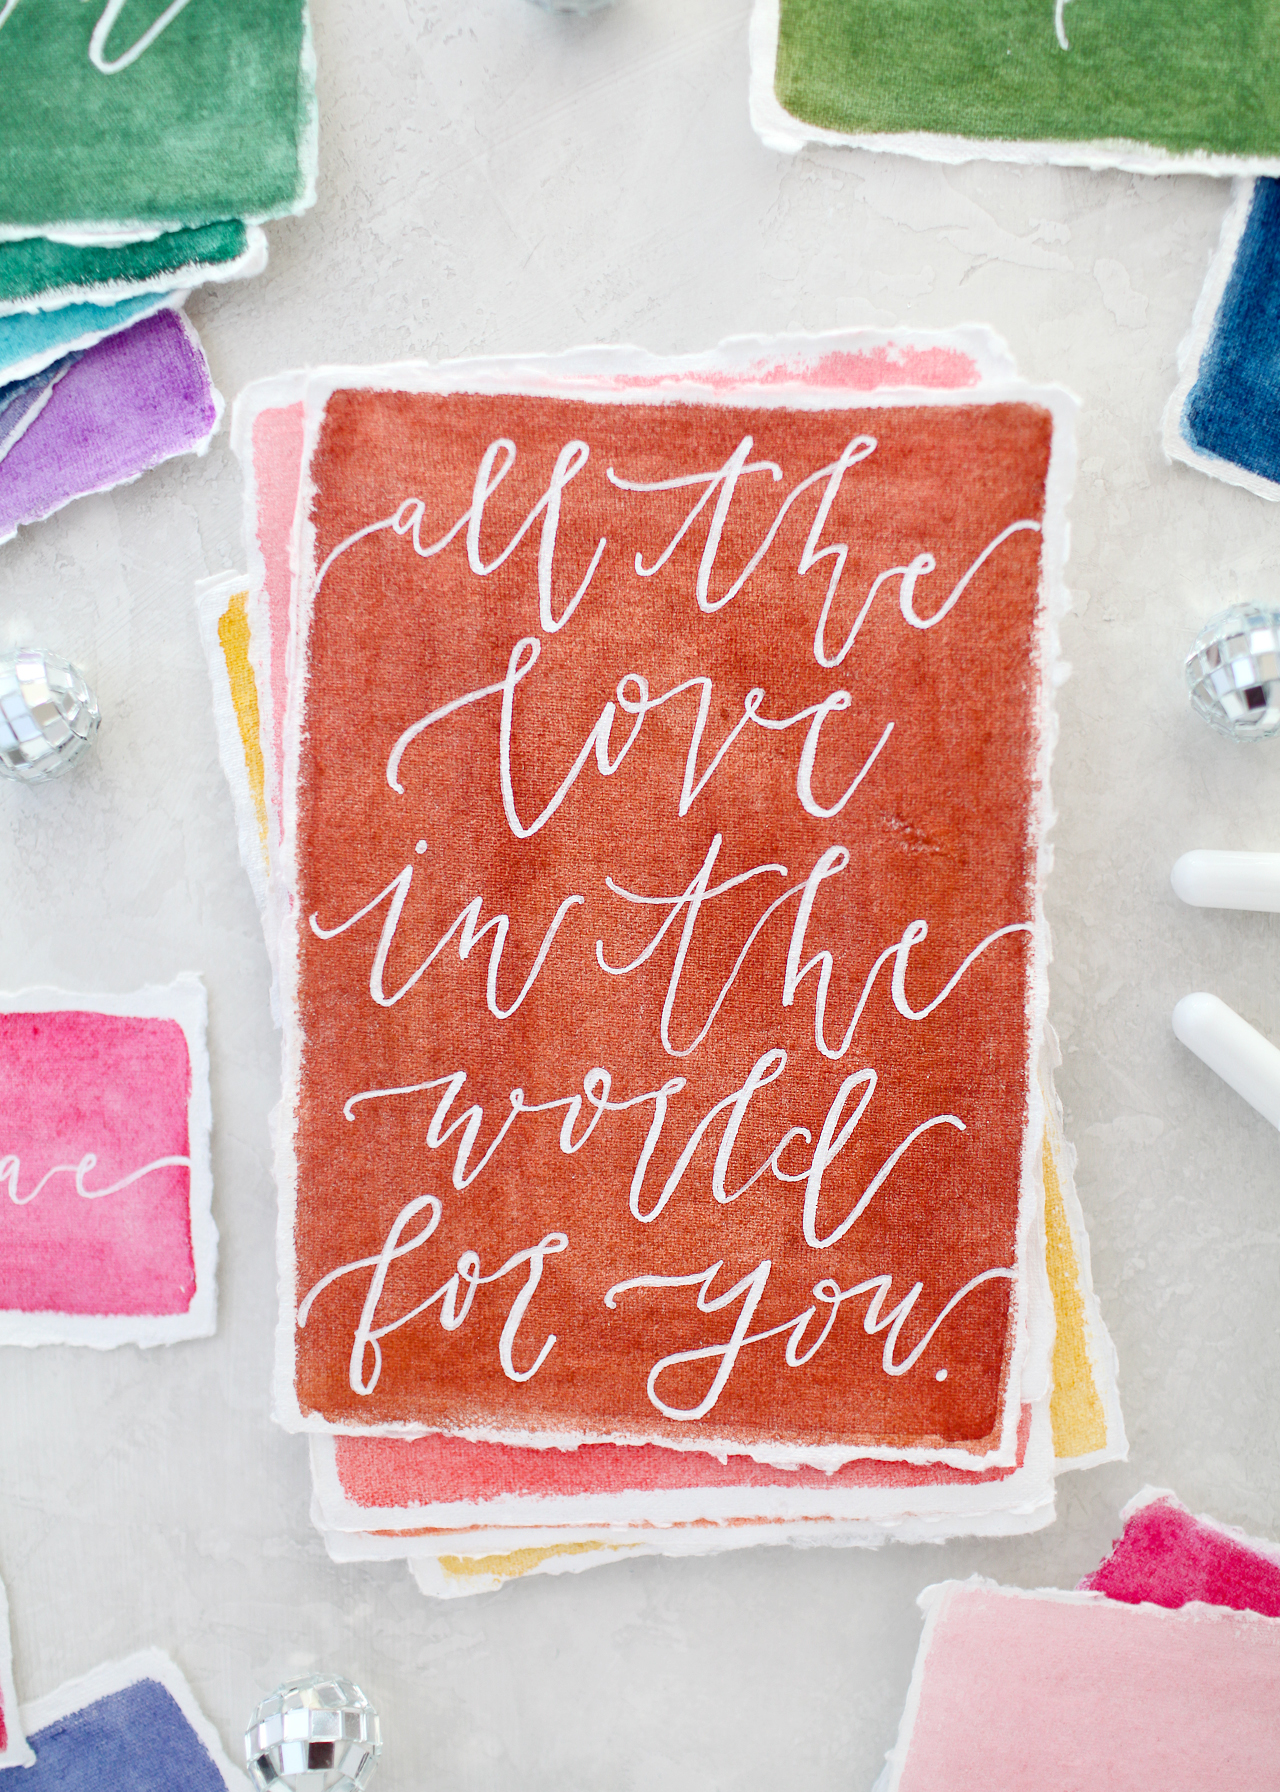 Rainbow Watercolor Wedding Stationery Inspiration with Sakura Koi Watercolors and White Gelly Roll Pens